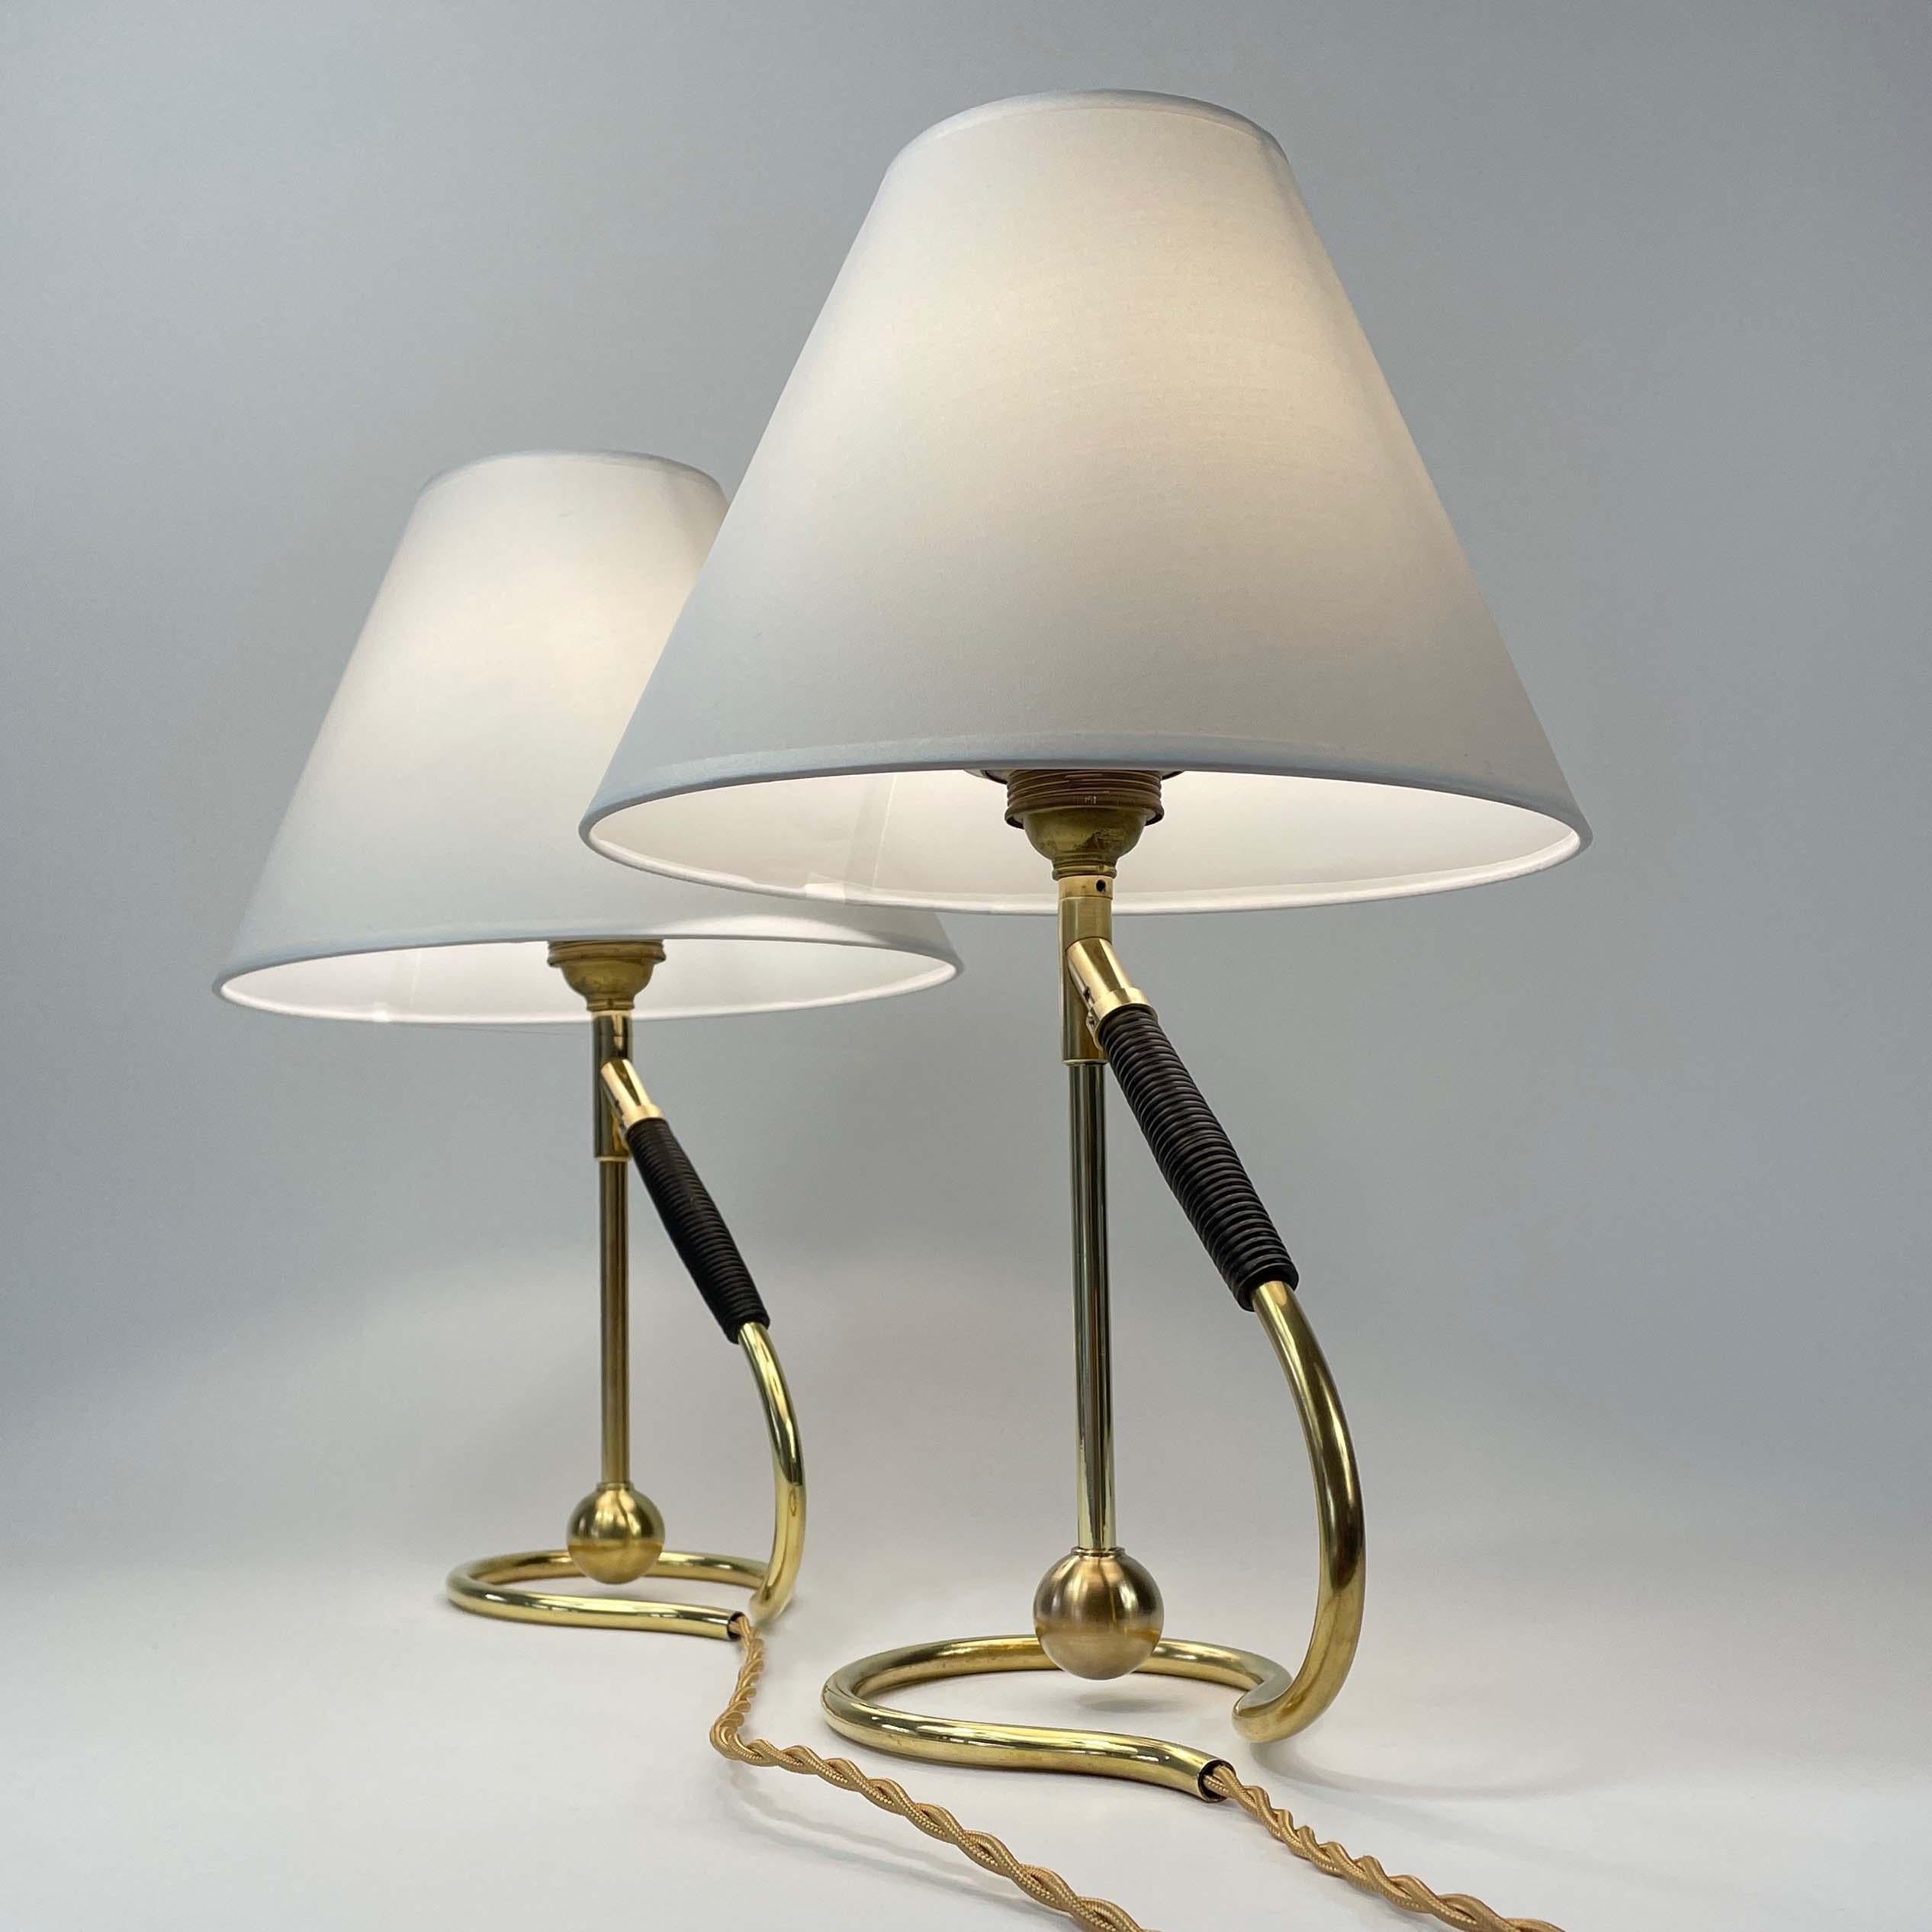 Mid-20th Century Adjustable Brass and Bakelite Wall and Table Lights 306 by Kaare Klint, 1950s For Sale